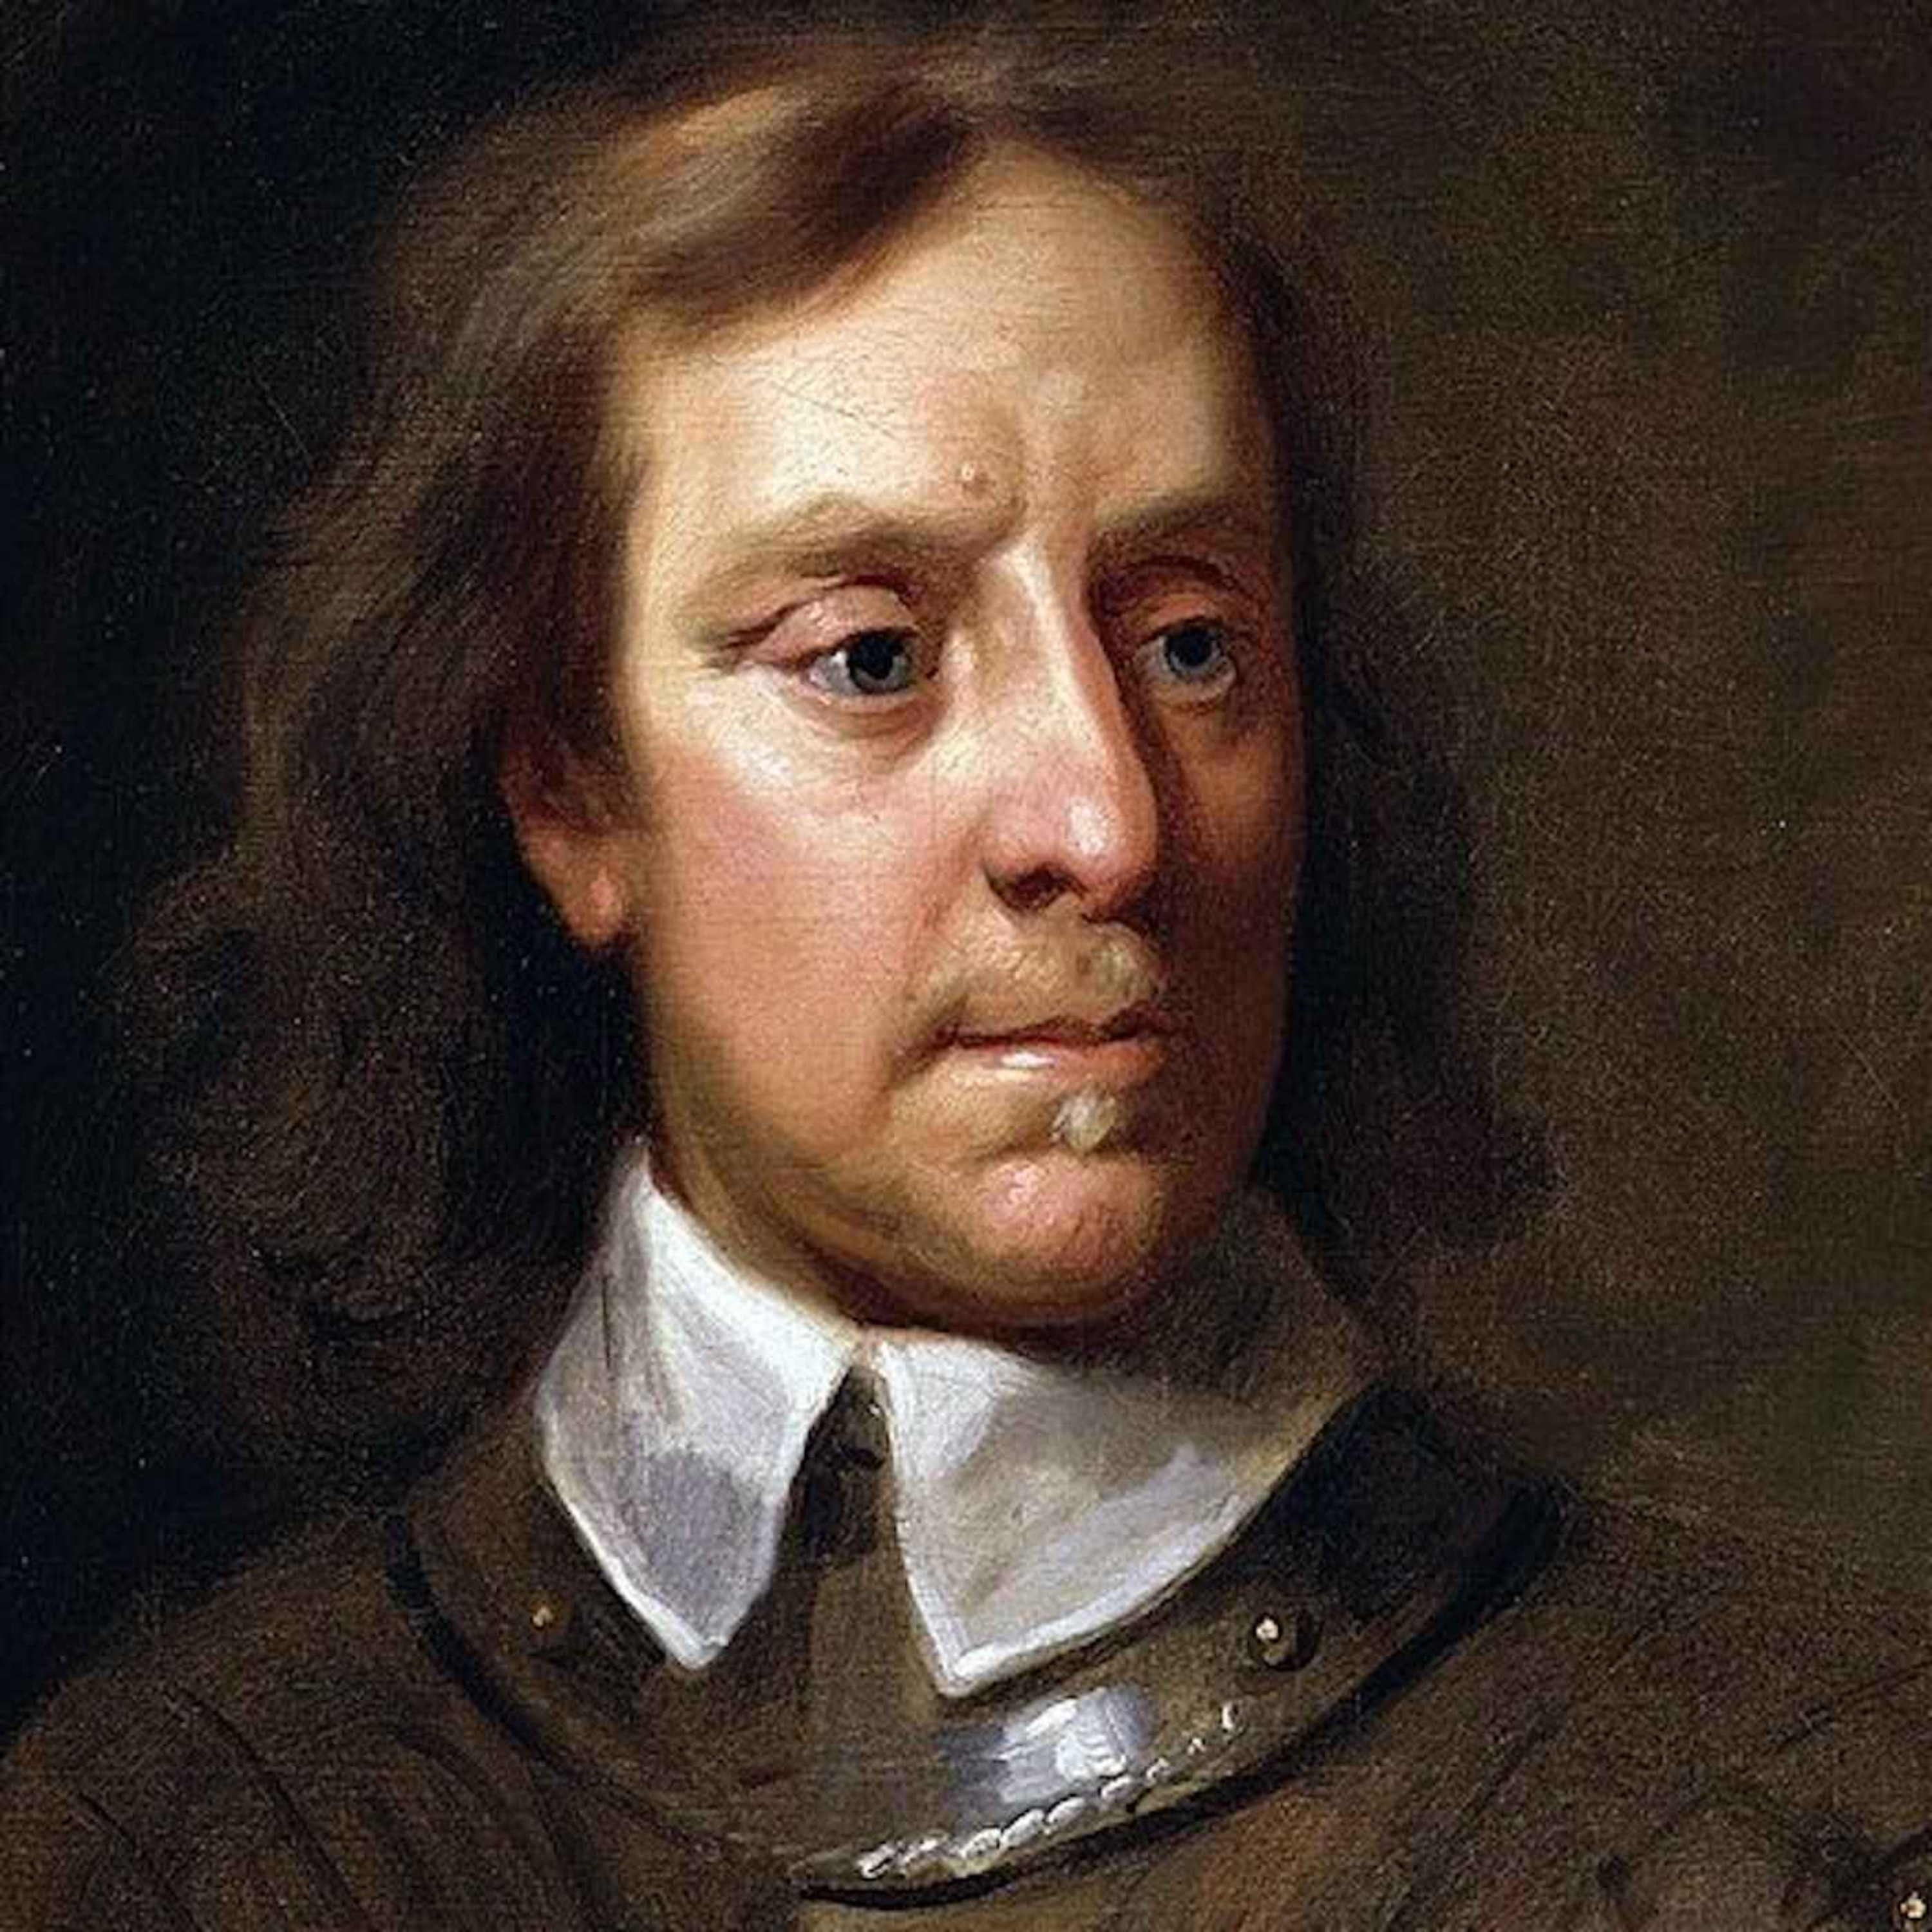 Oliver Cromwell - Still Notorious, But Why?